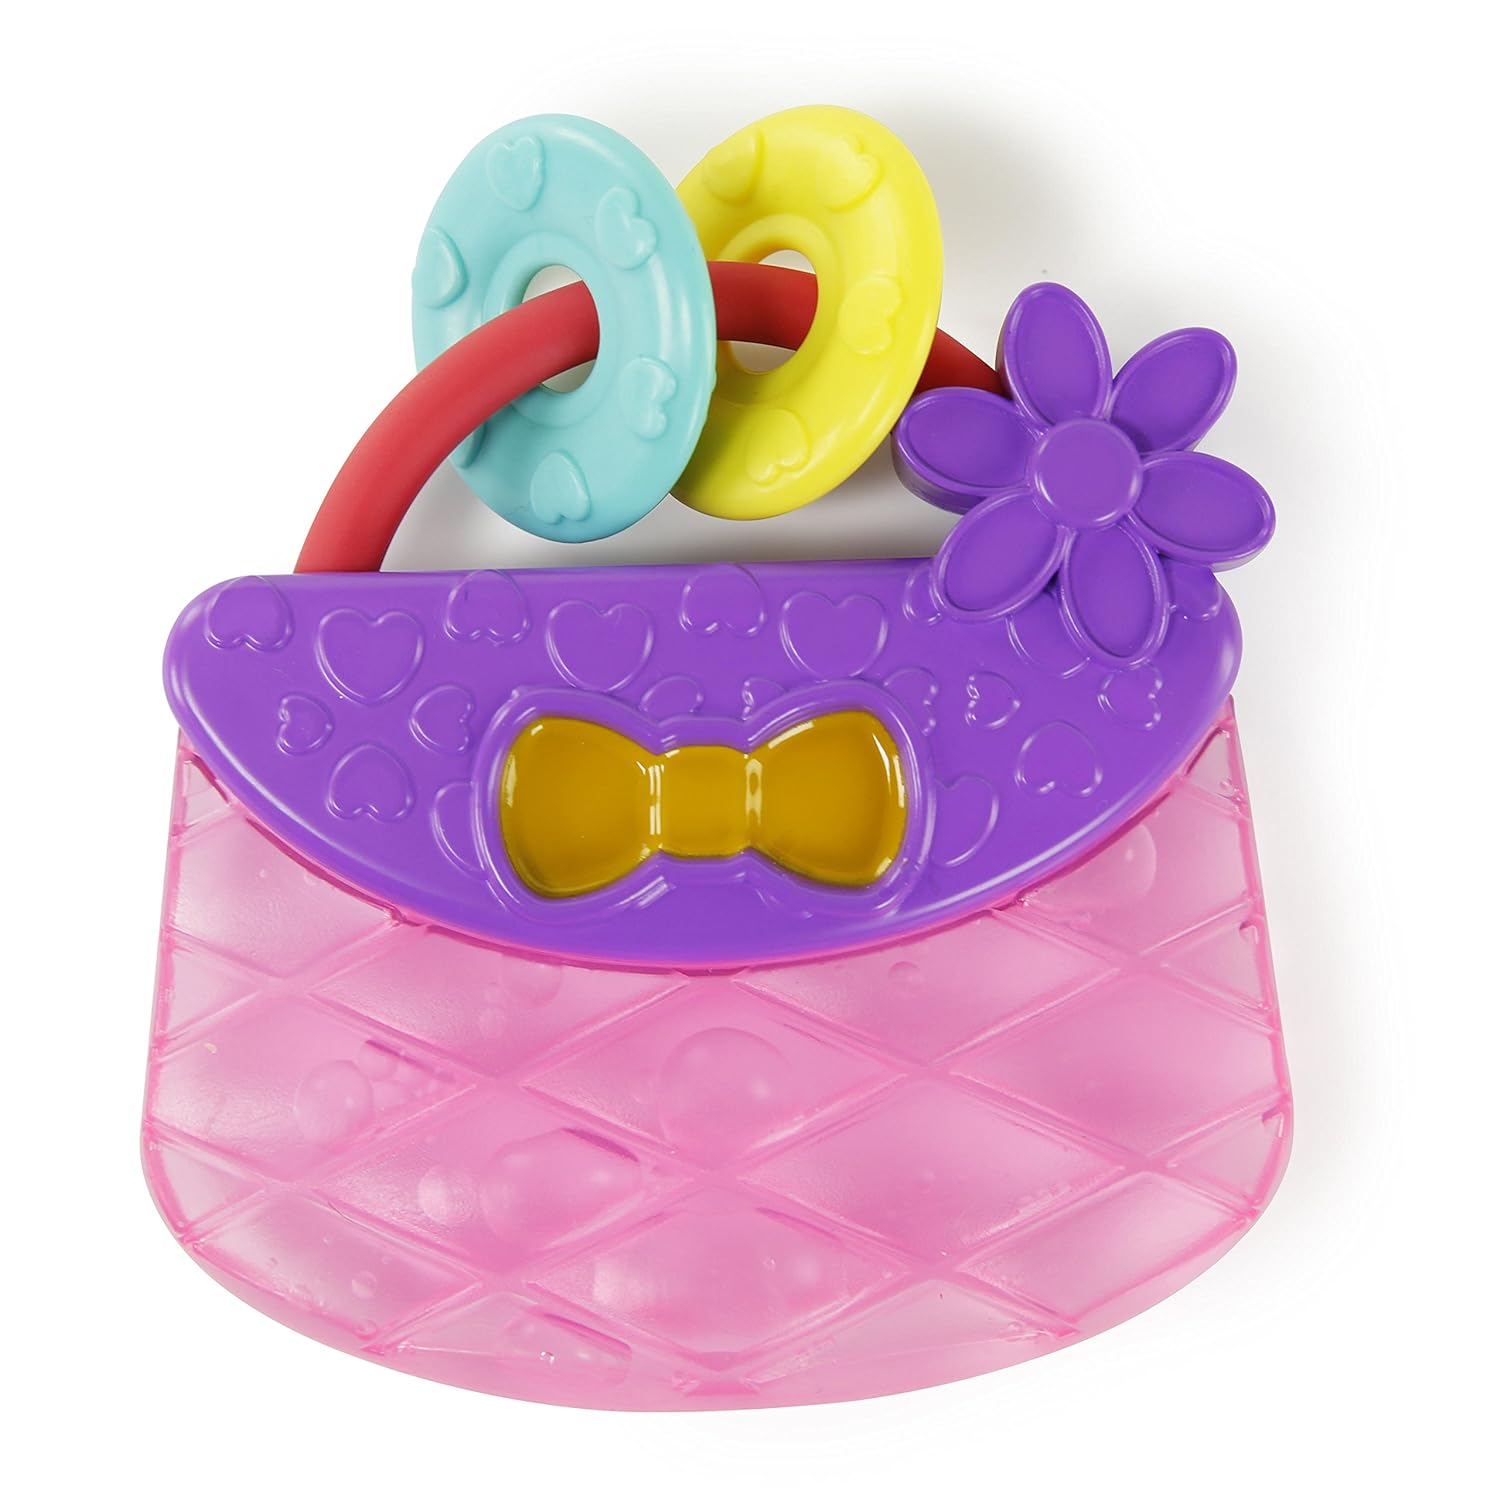 Bright Starts Carry & Teethe Purse Chillable Teether Toy, Ages 3 months+, Pretty in Pink